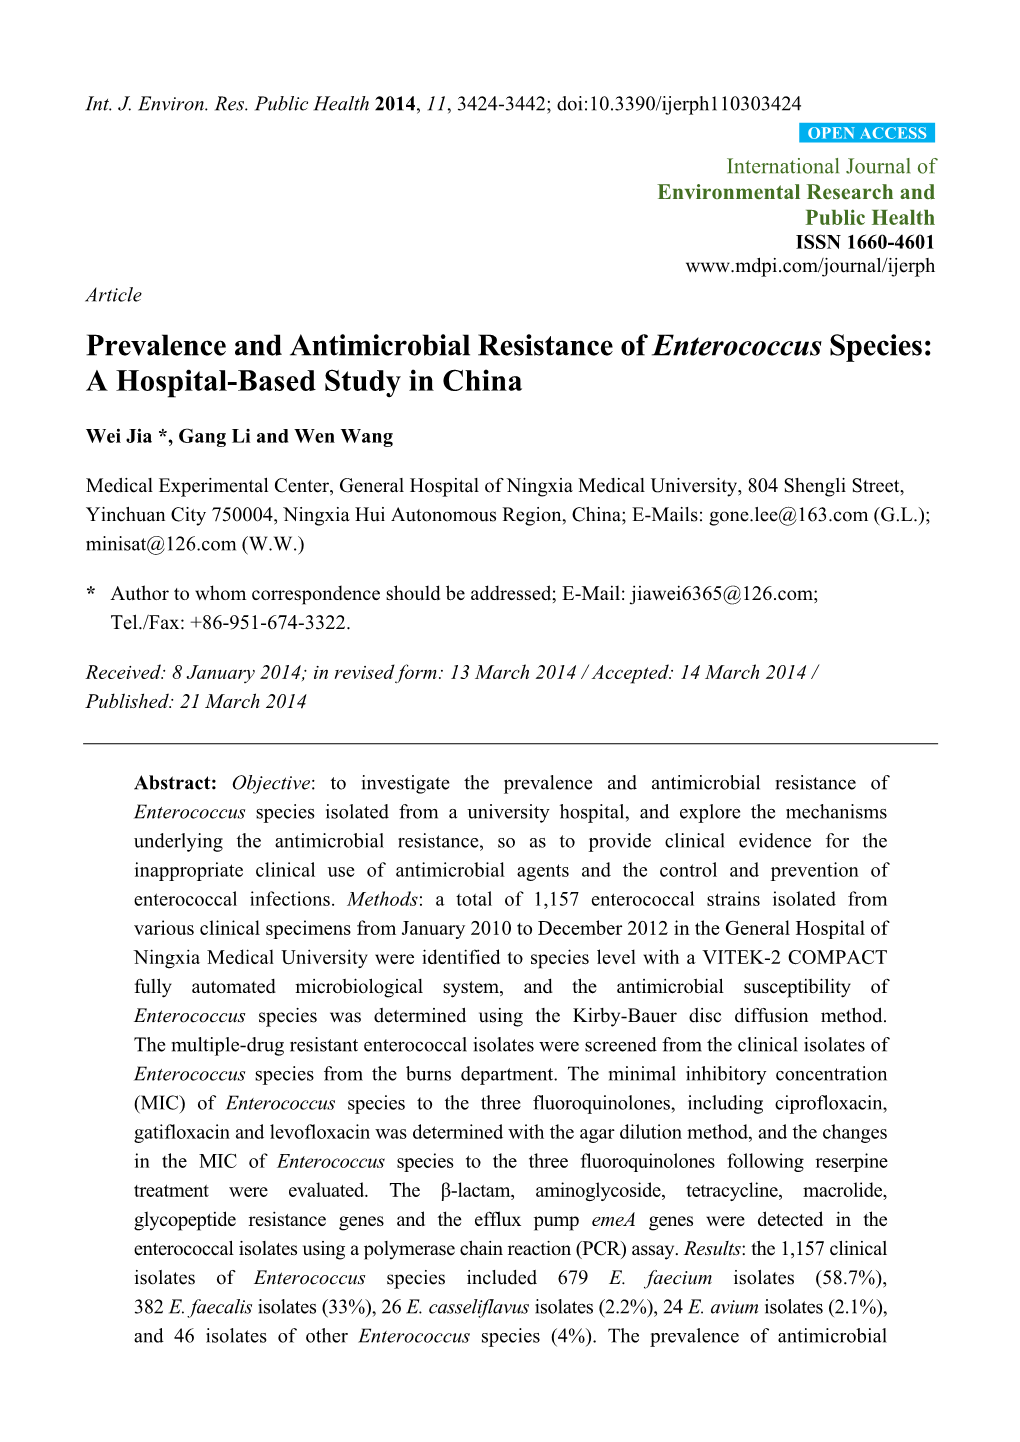 Prevalence and Antimicrobial Resistance of Enterococcus Species: a Hospital-Based Study in China